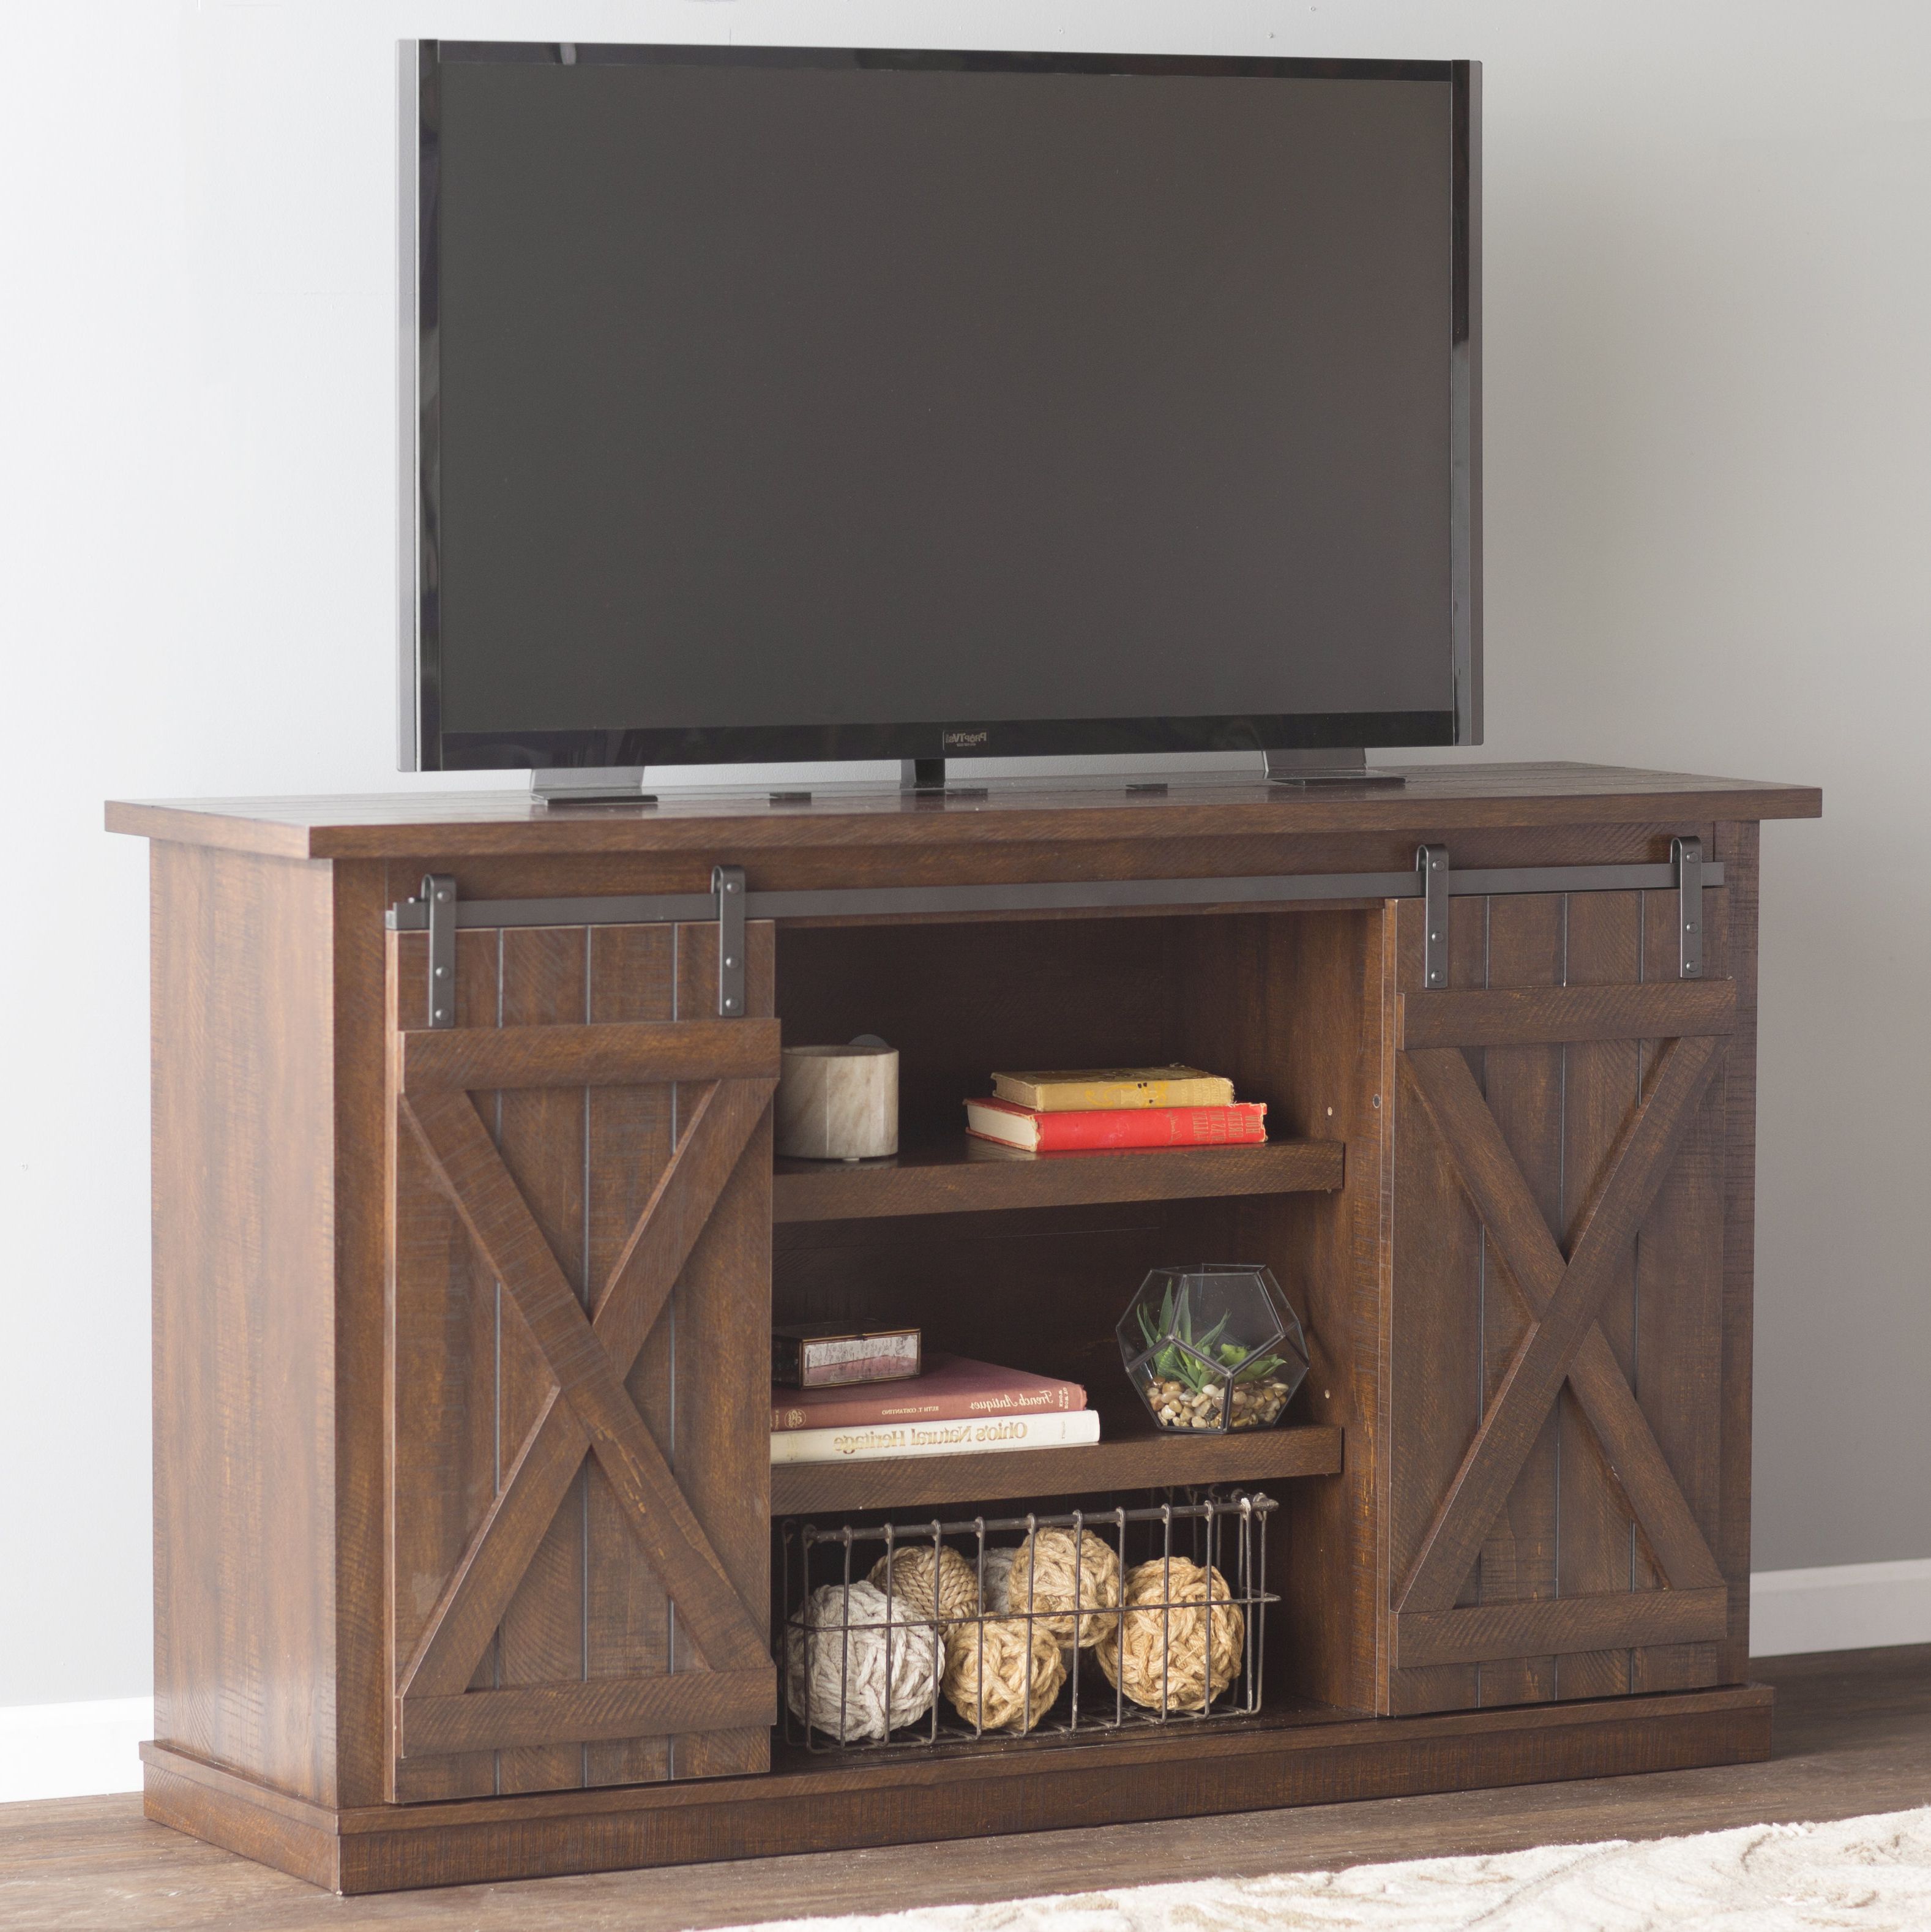 Wayfair With White Rustic Tv Stands (View 17 of 20)